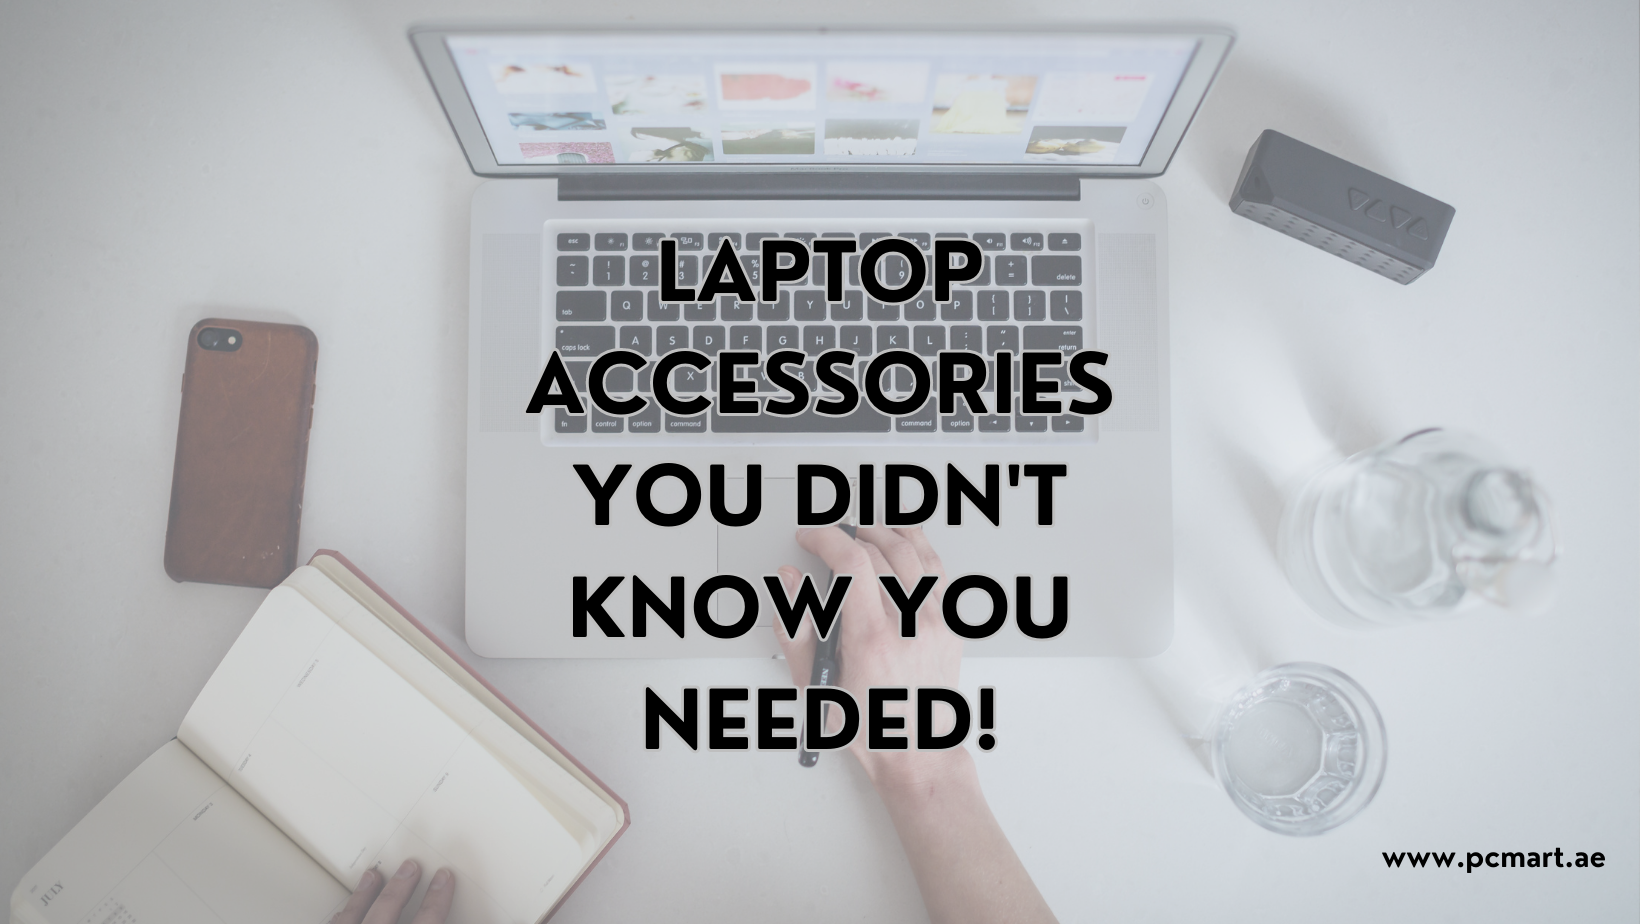 Laptop Accessories You Didn't Know You Needed